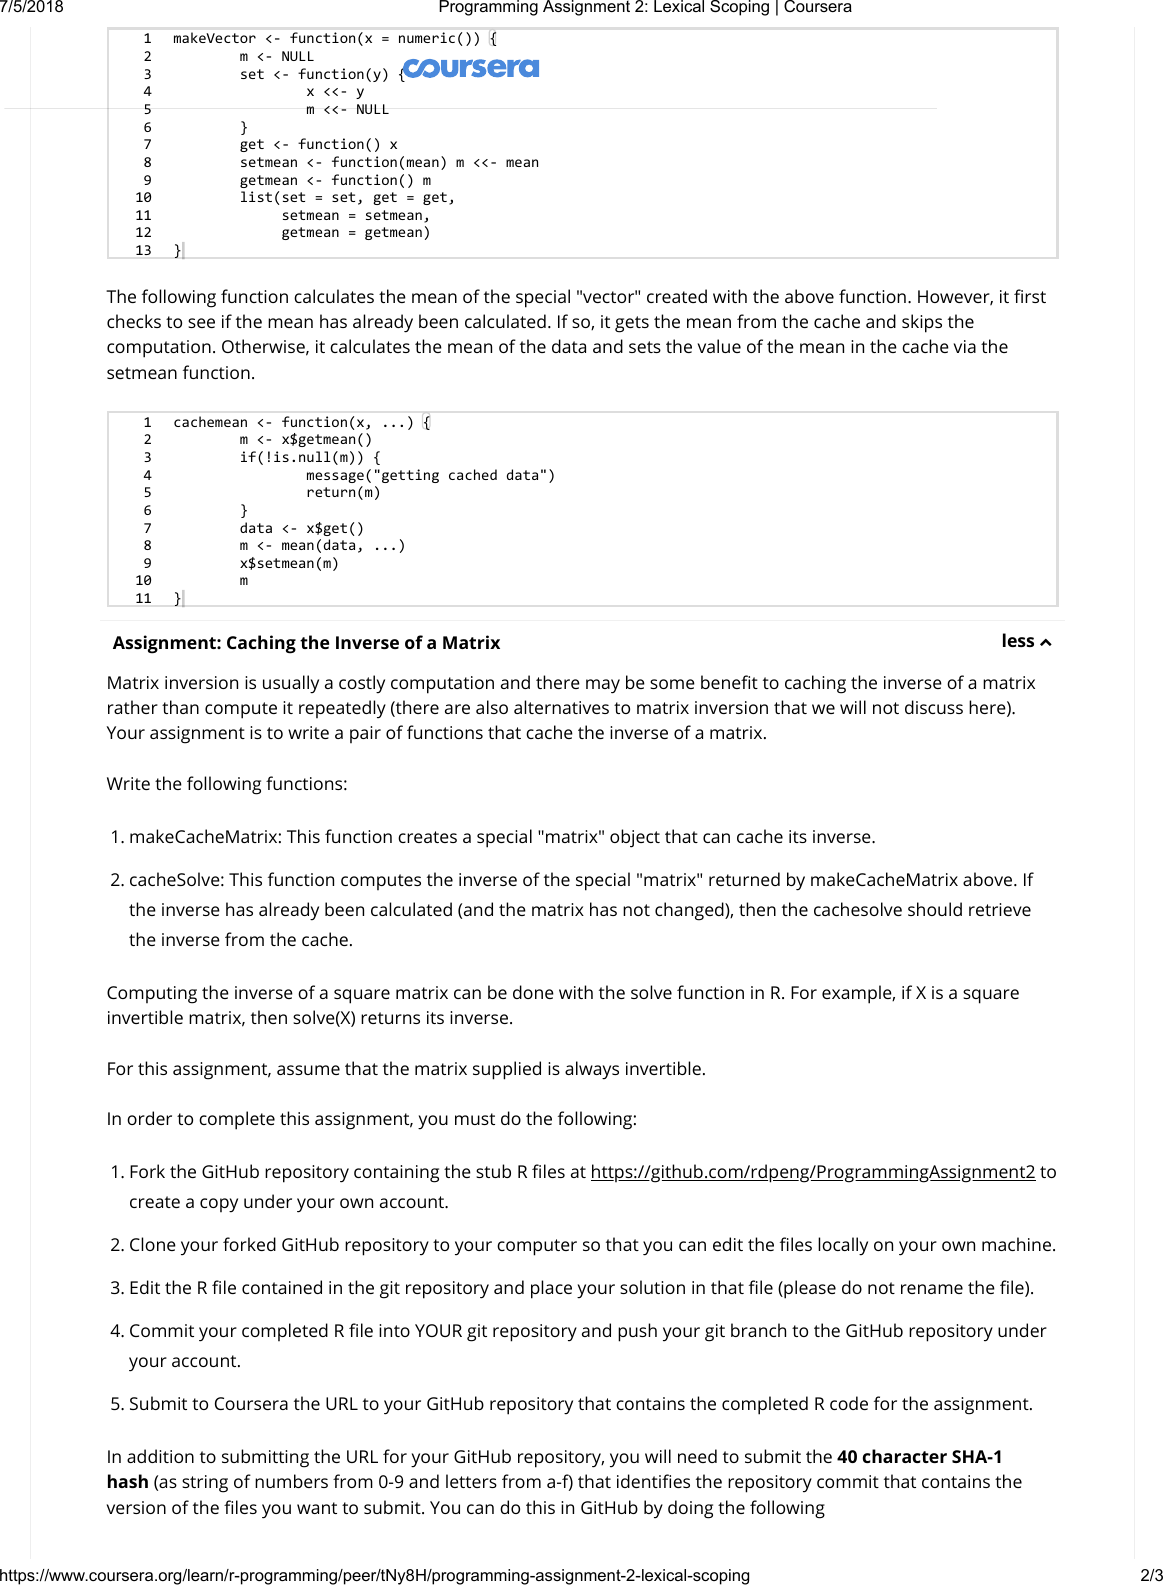 Page 2 of 3 - Programming Assignment 2 Lexical Scoping  Coursera Instructions